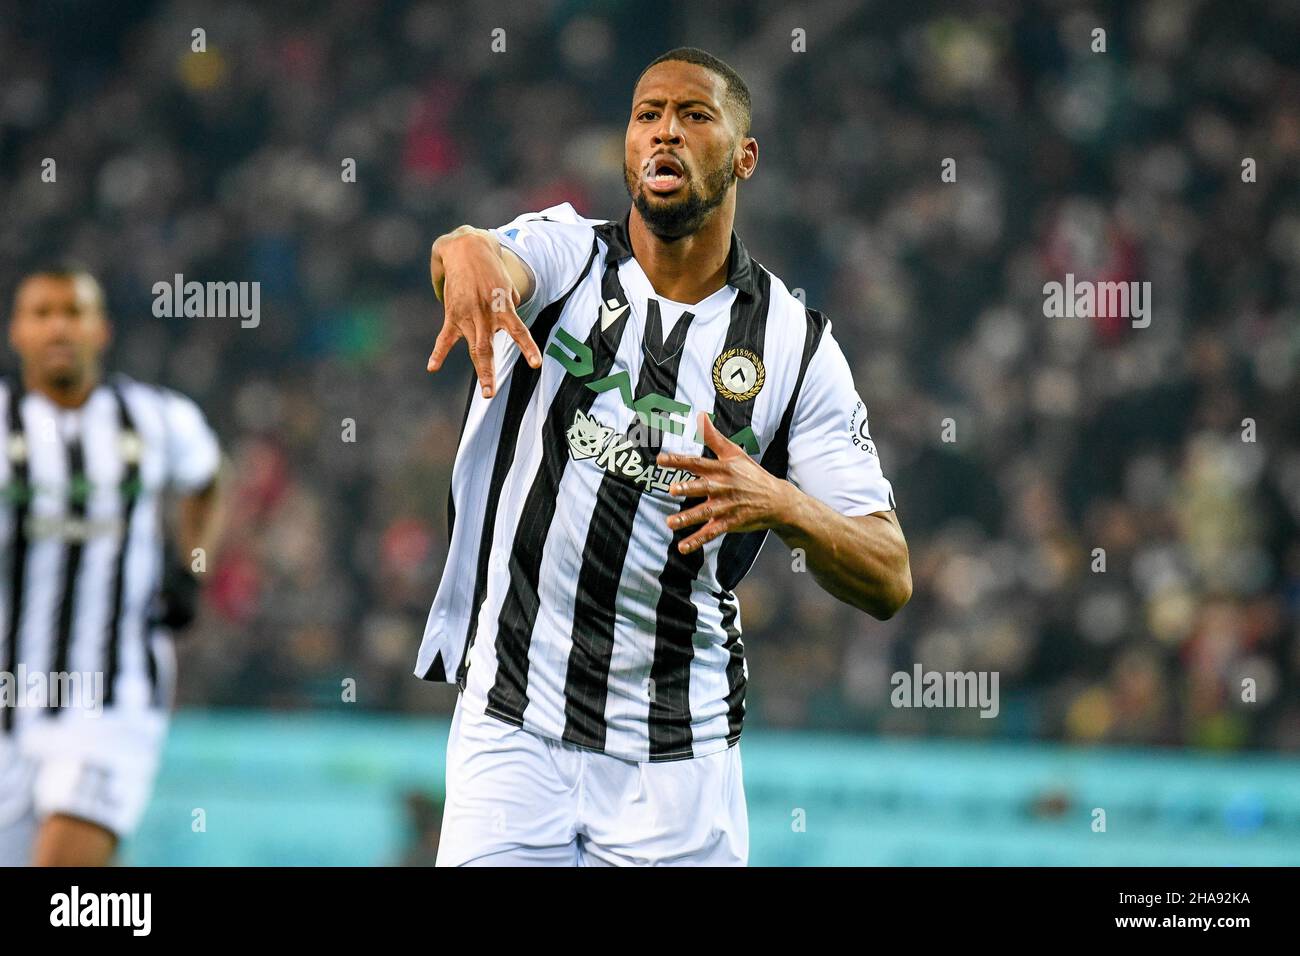 Udine, Italy. 11th Dec, 2021. Udinese's Norberto Bercique Gomes Betuncal celebrates after scoring a goal 1-0 during Udinese Calcio vs AC Milan, italian soccer Serie A match in Udine, Italy, December 11 2021 Credit: Independent Photo Agency/Alamy Live News Stock Photo